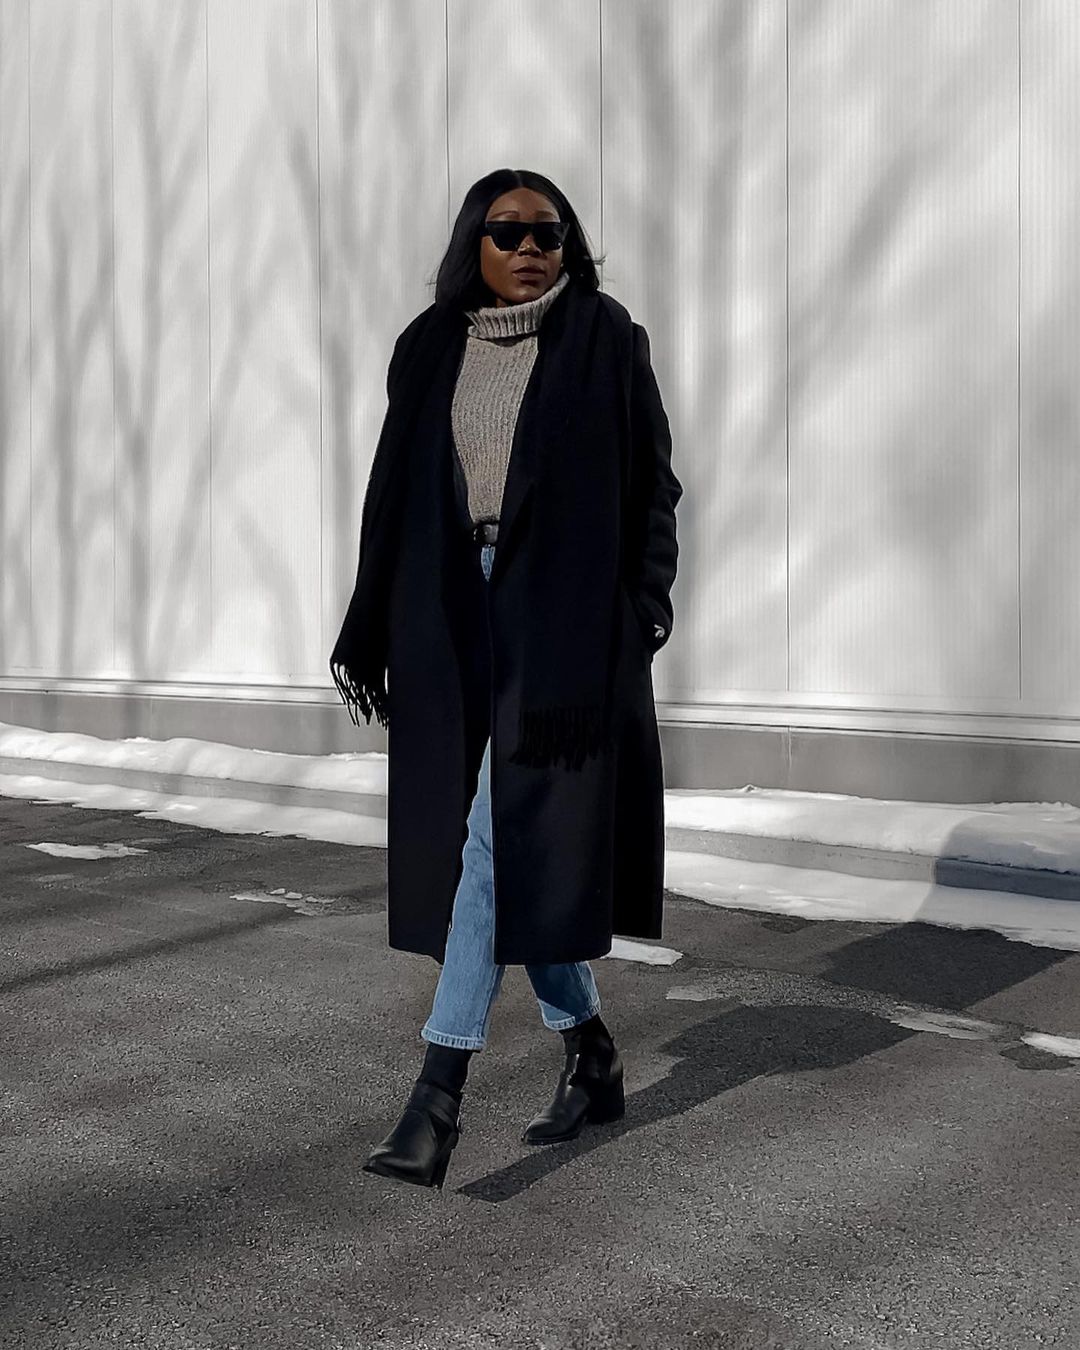 Stylish Winter Outfit Idea From Instagram — Sabrinah Edouard in a black coat, gray turtleneck sweater, jeans, and black boots